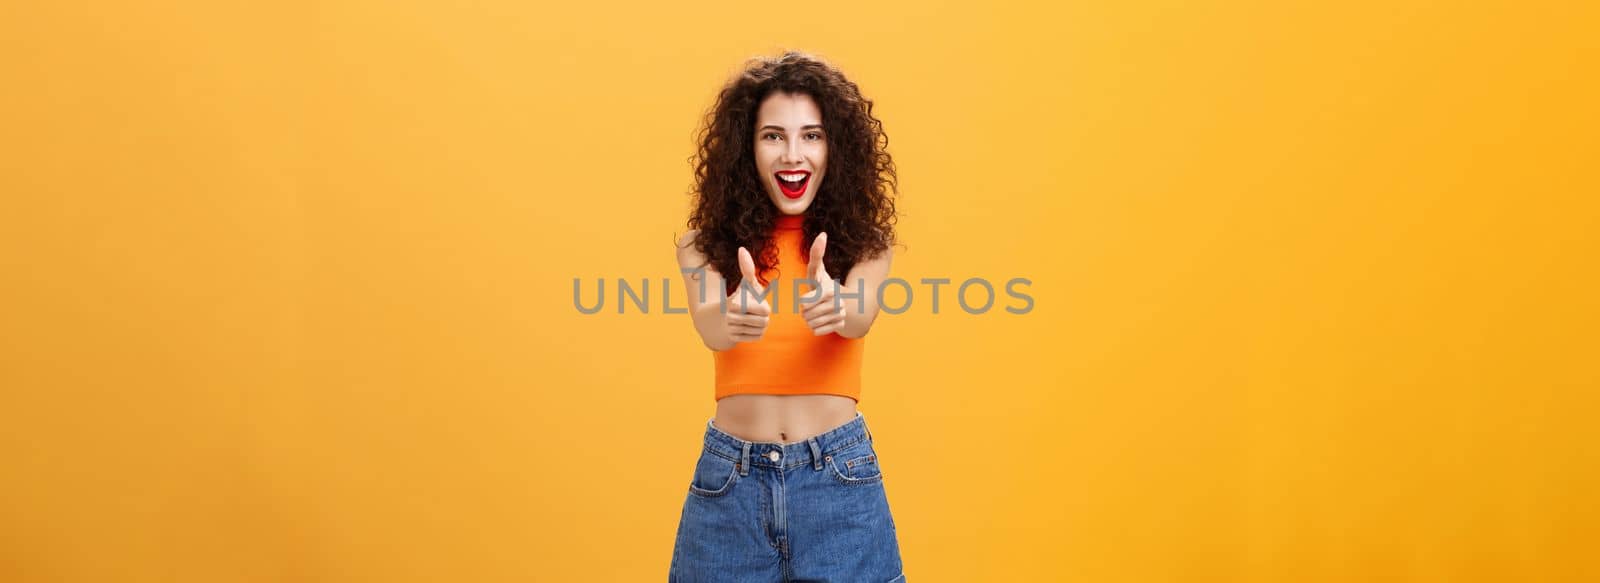 Charismatic ambitious and outgoing charming caucasian woman with curly hairstyle and red lipstick showing thumbs up gesture in like or approval smiling joyfully being supportive over orange wall by Benzoix